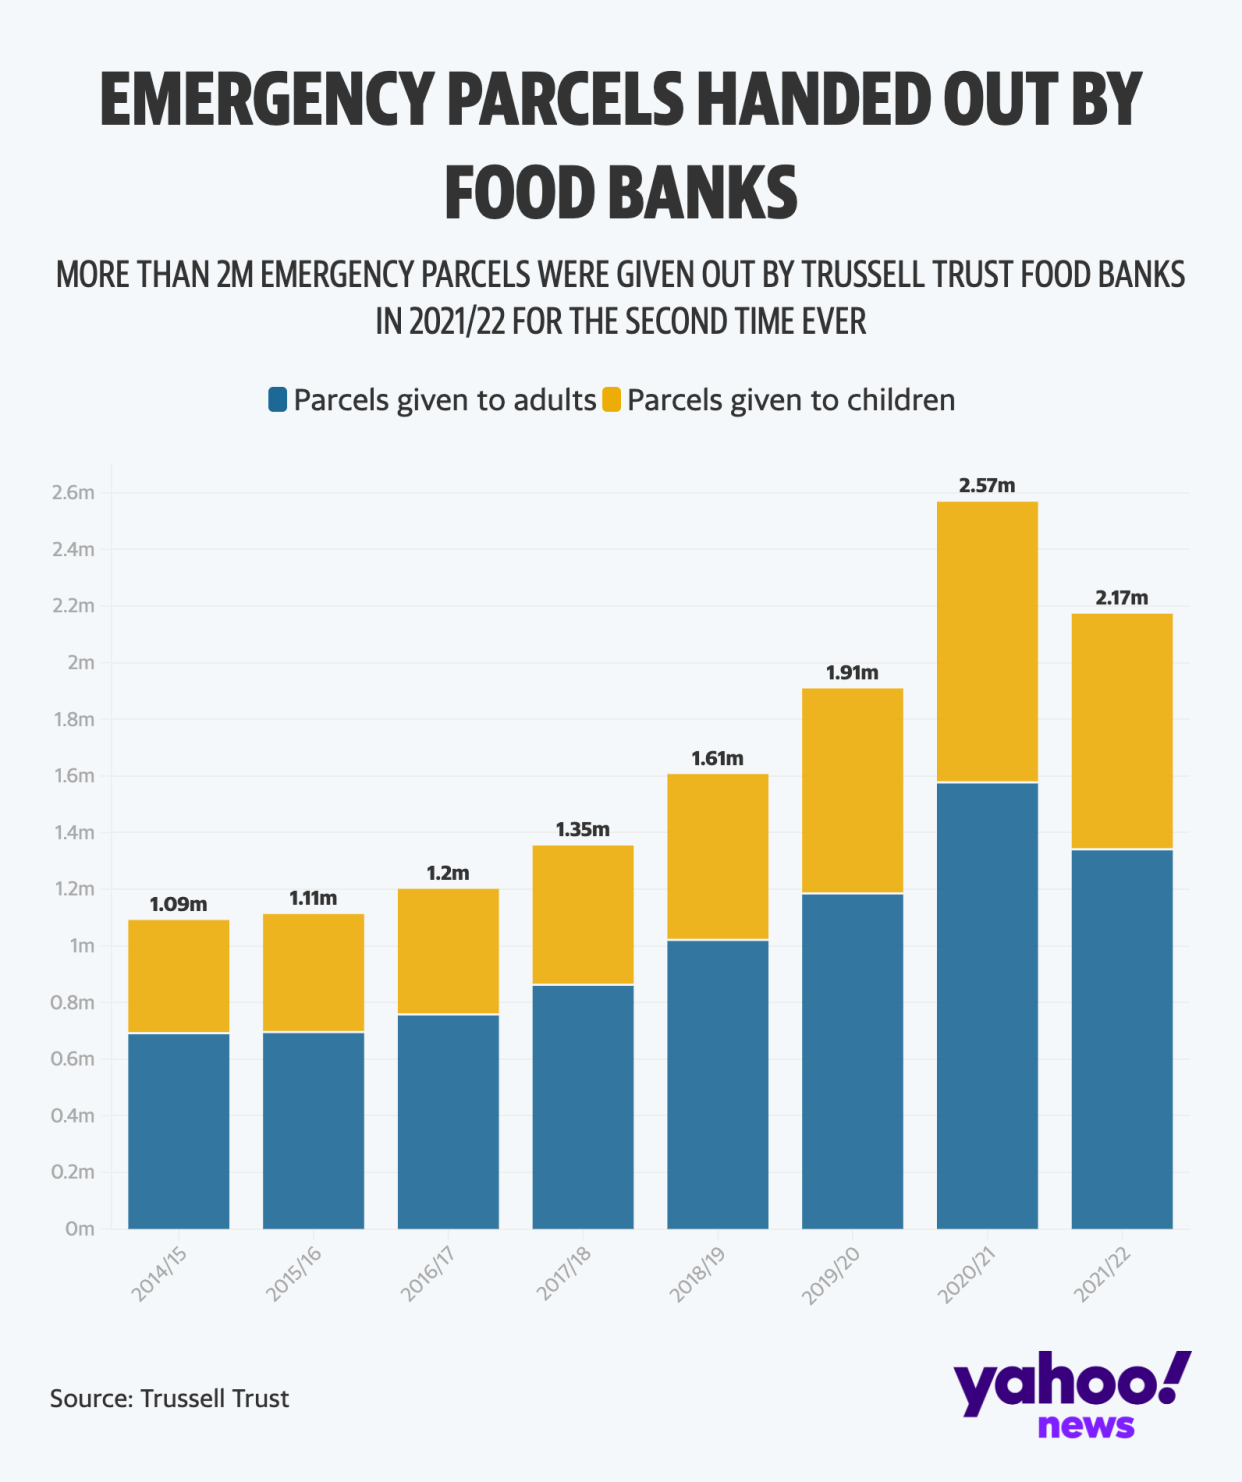 More than 2 million emergency parcels were given out by Trussell Trust food banks in 2021/2022 for the second time ever. (Trussell Trust)